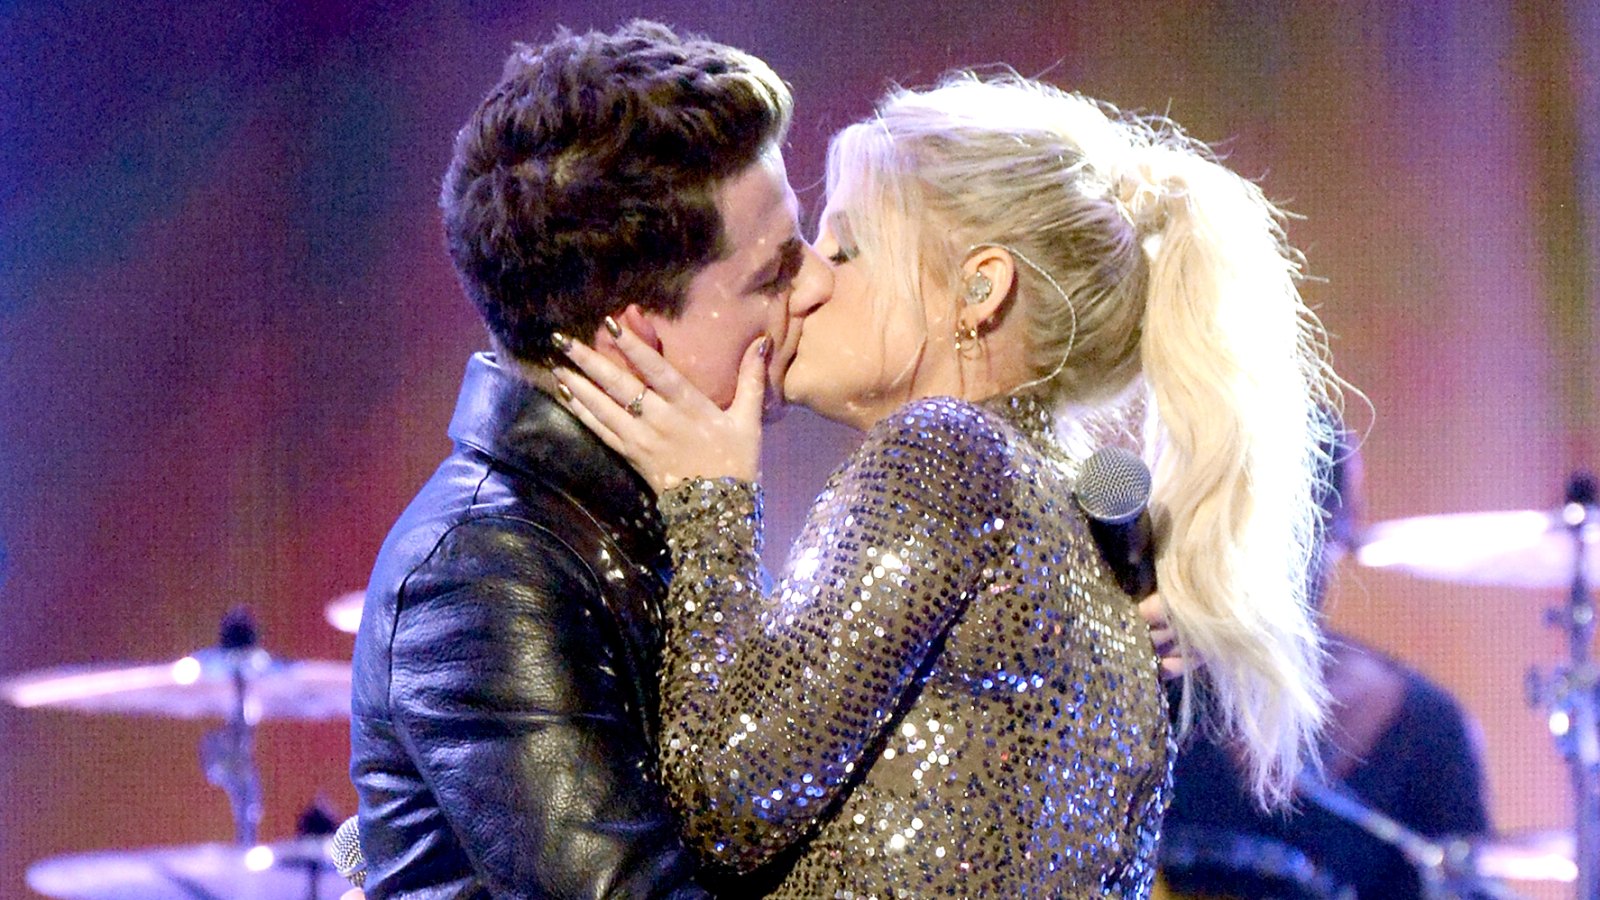 Charlie Puth and Meghan Trainor kiss onstage during the 2015 American Music Awards.